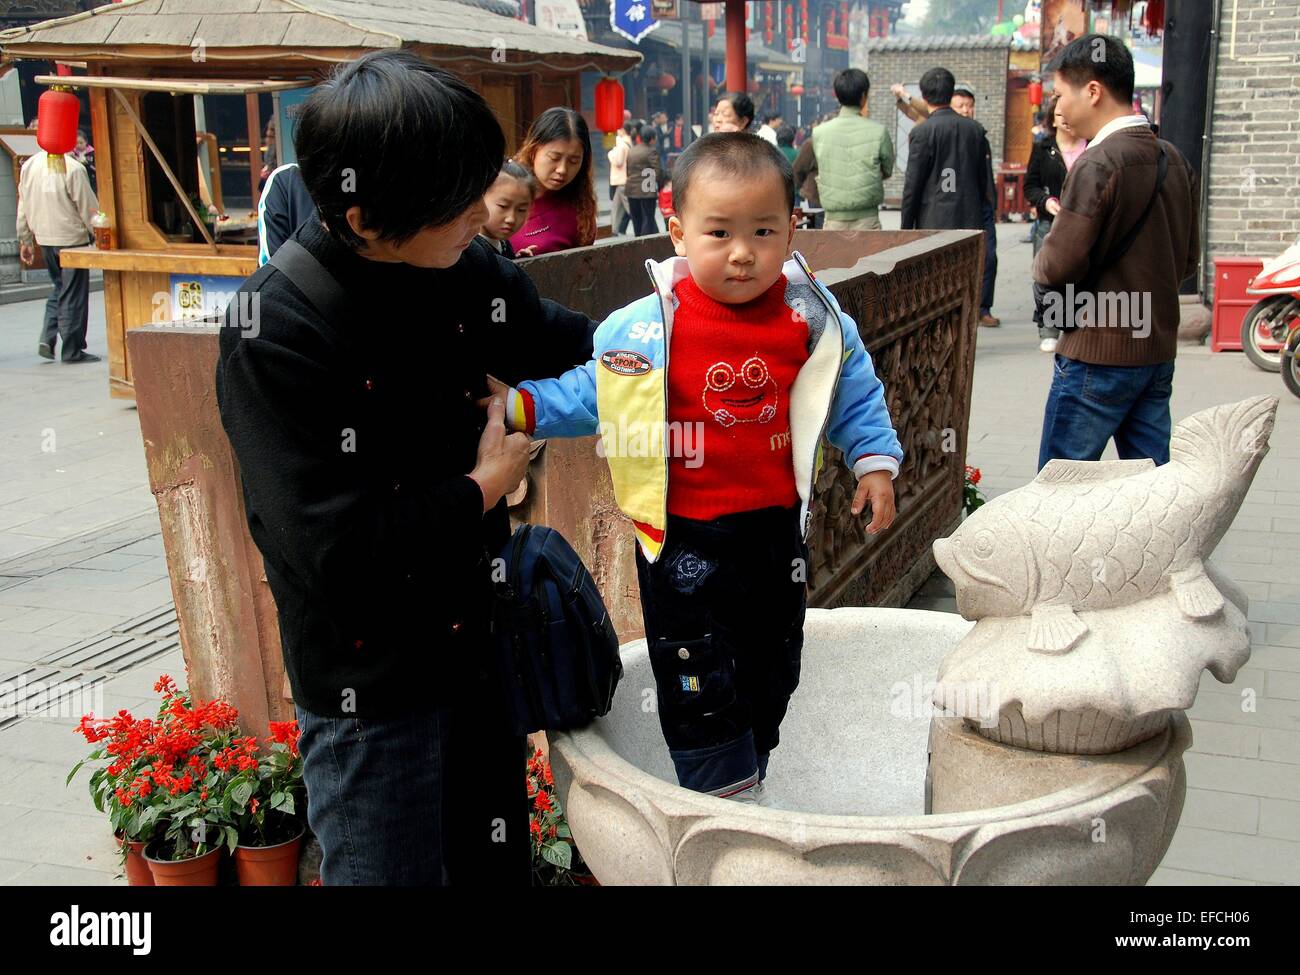 Chengdu, China: A little boy standing in a fish fountain basin held by ...